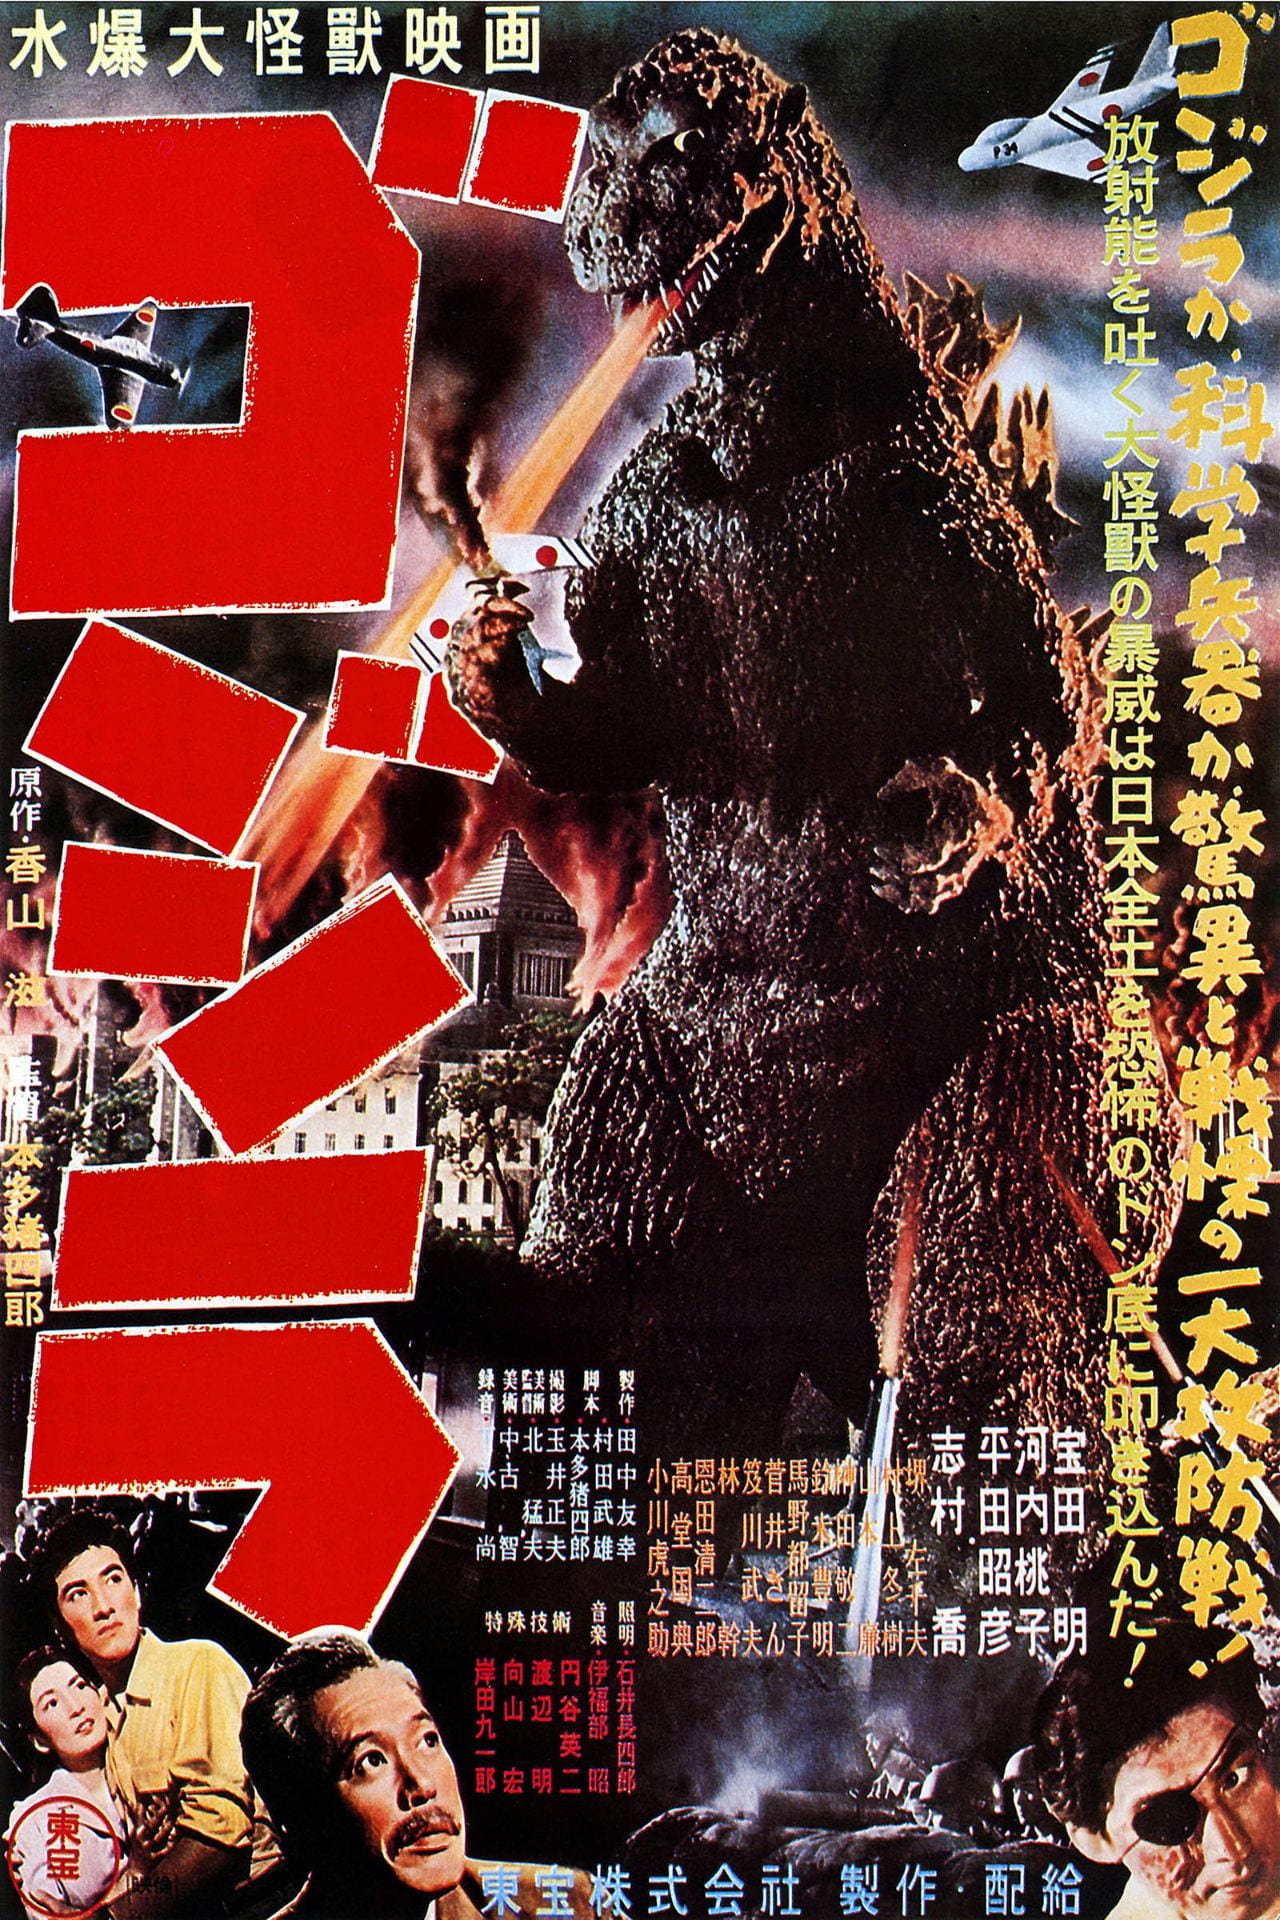 The original poster for the Godzilla Movie. Godzilla is shooting a beam of fire through a Japanese plane in his hand, as the protagonists of the film look on in stoic horror.